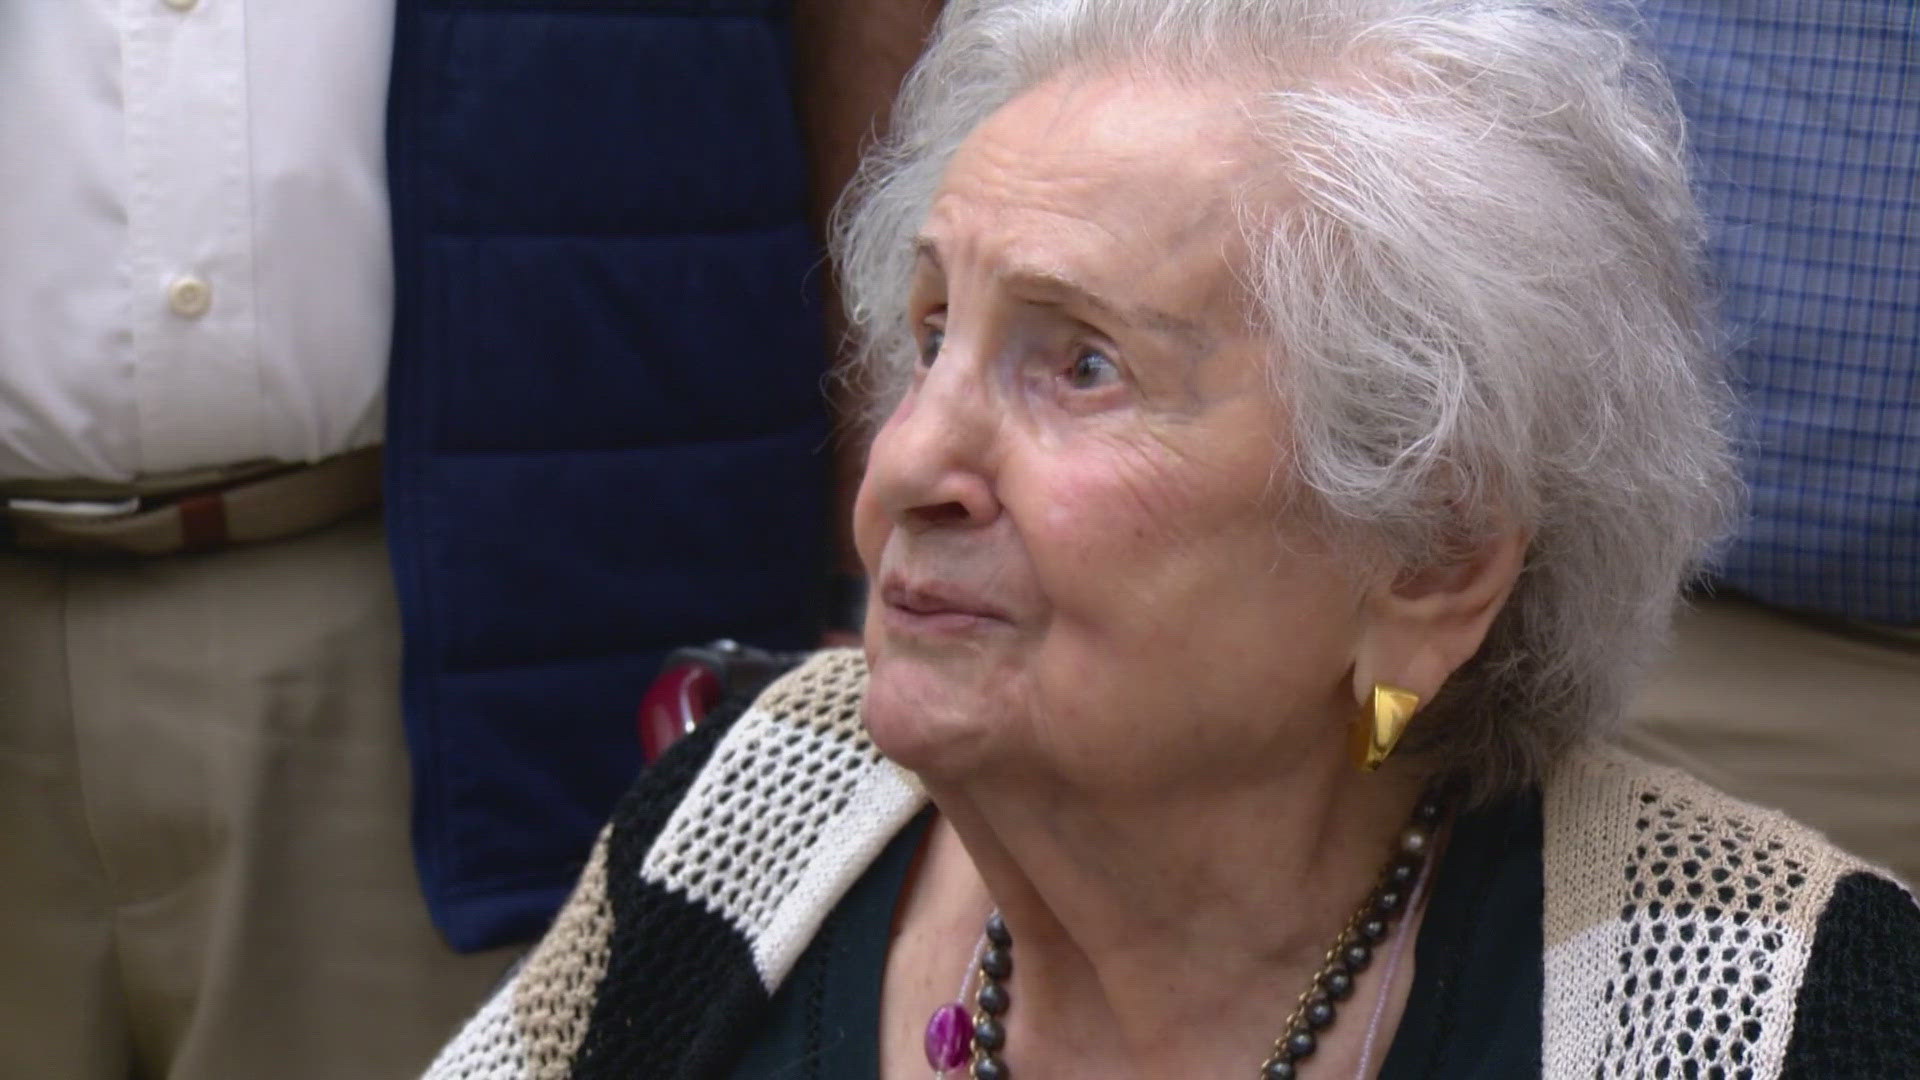 97-year-old Susanne Jalnos is one of the few who made it out of Auschwitz alive. She fears history will repeat itself if we don't remember stories like her's.